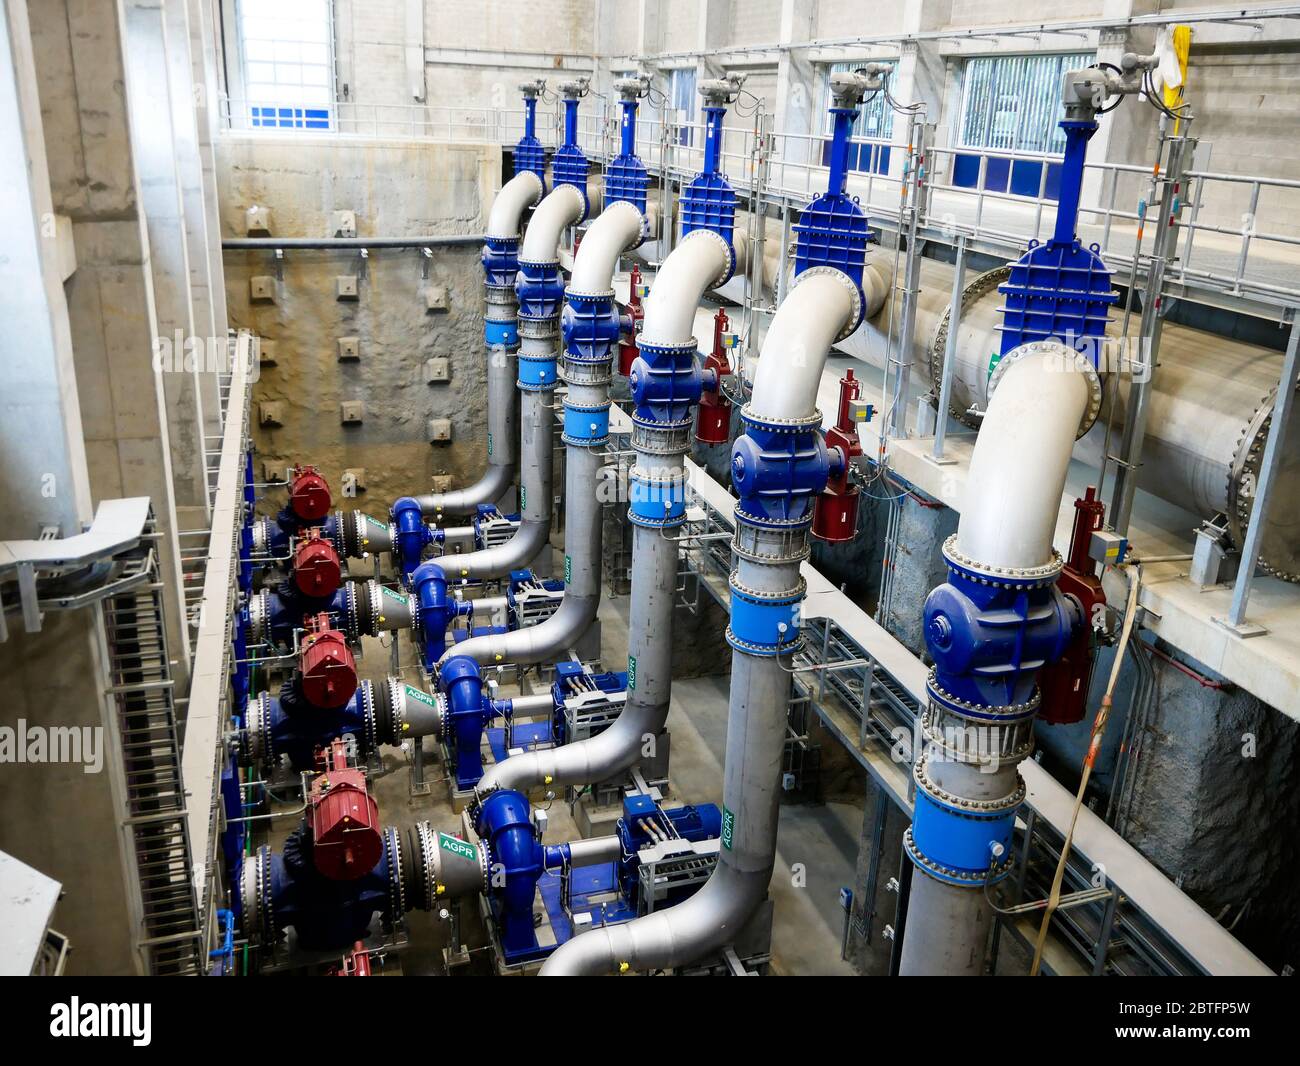 Bello, Colombia, December 17 2019: interior of a pumping station in a waste water treatment plant in Bello, colombia Stock Photo